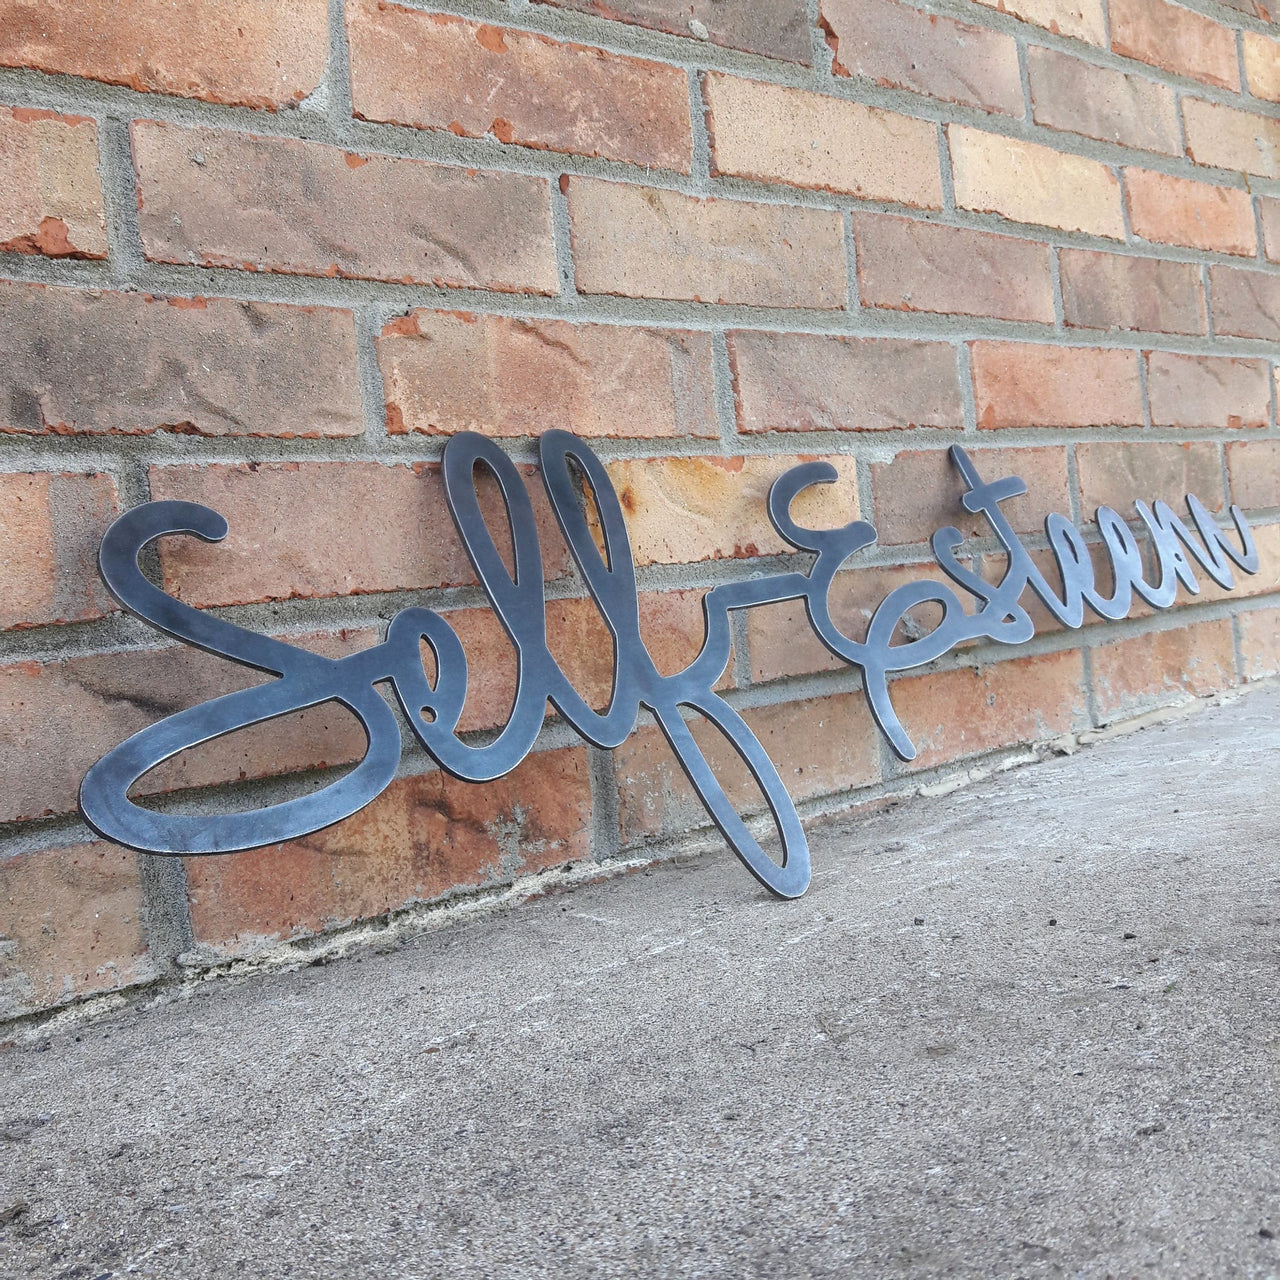 This custom metal sign is a cursive word and reads, "Self-Esteem".